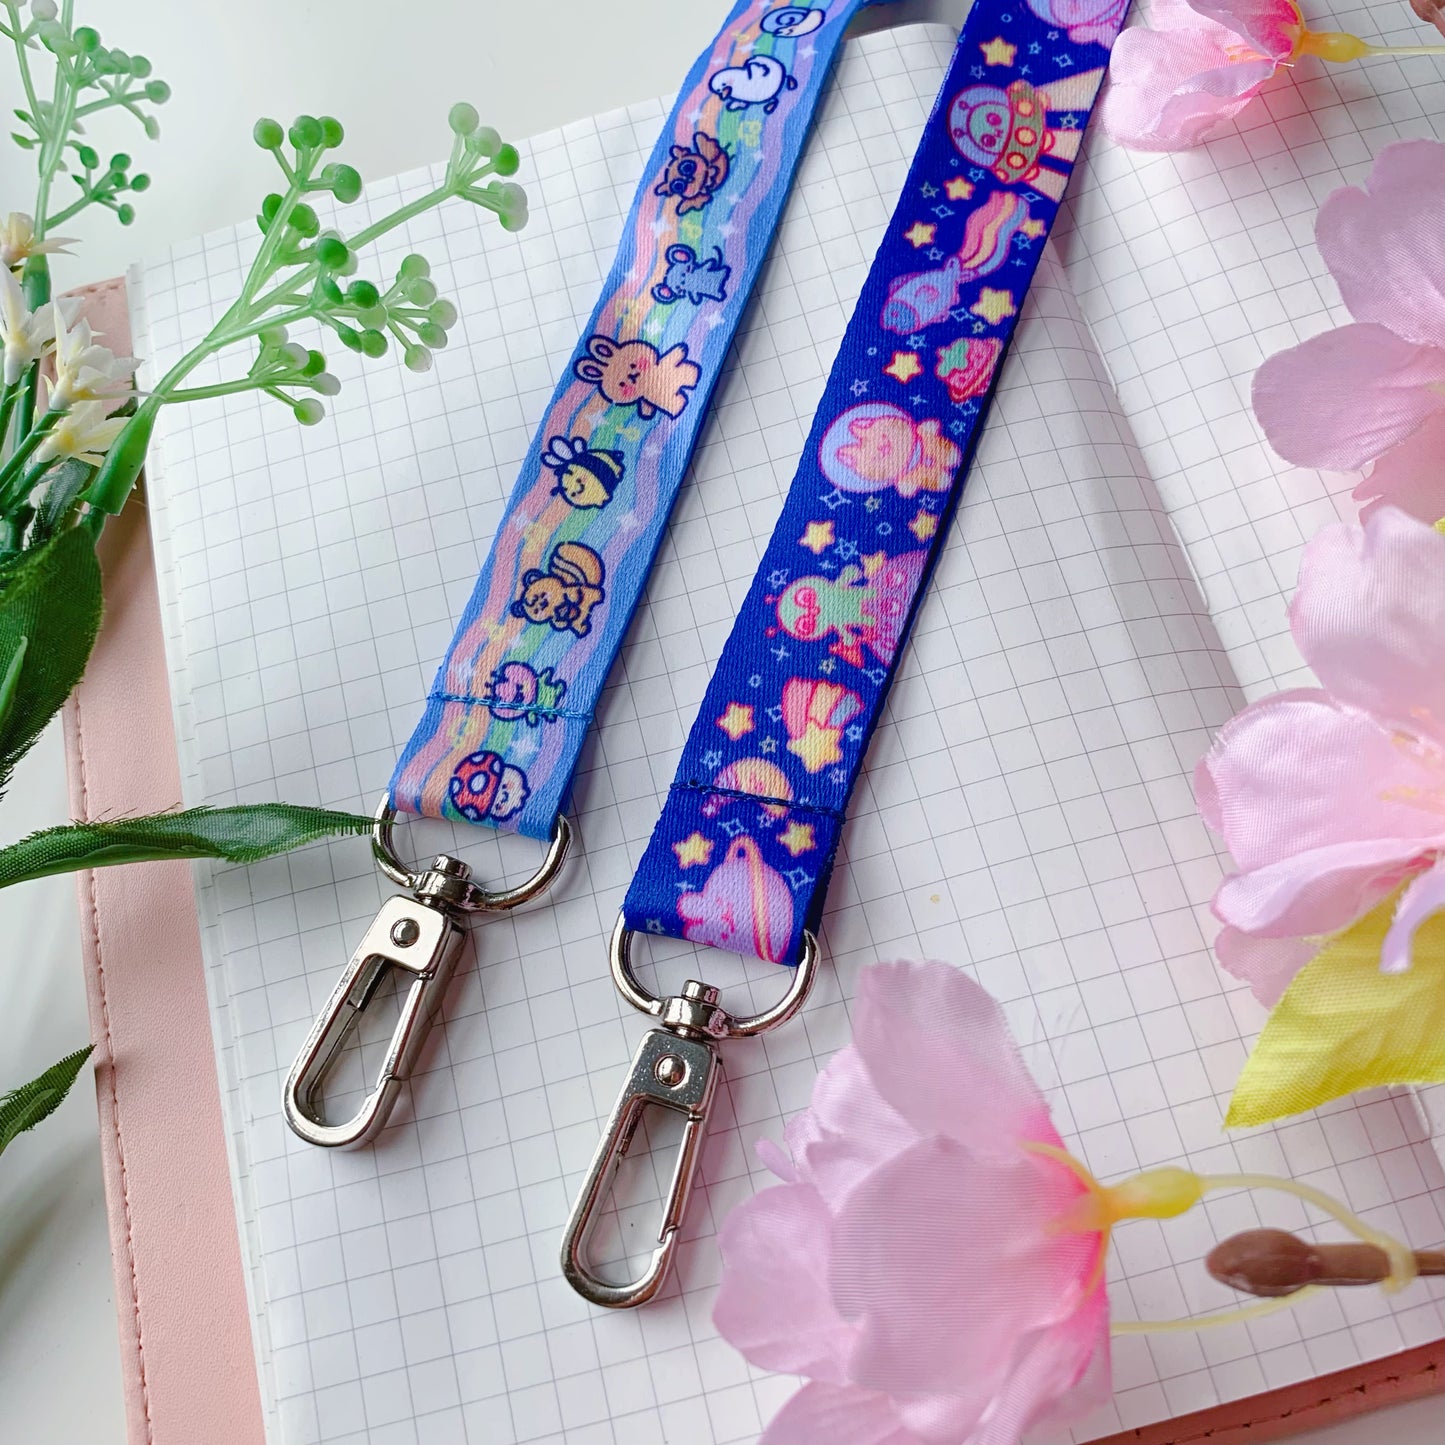 Original Art | 90cm (35”) Lanyard (Only Available to Canada Customers)